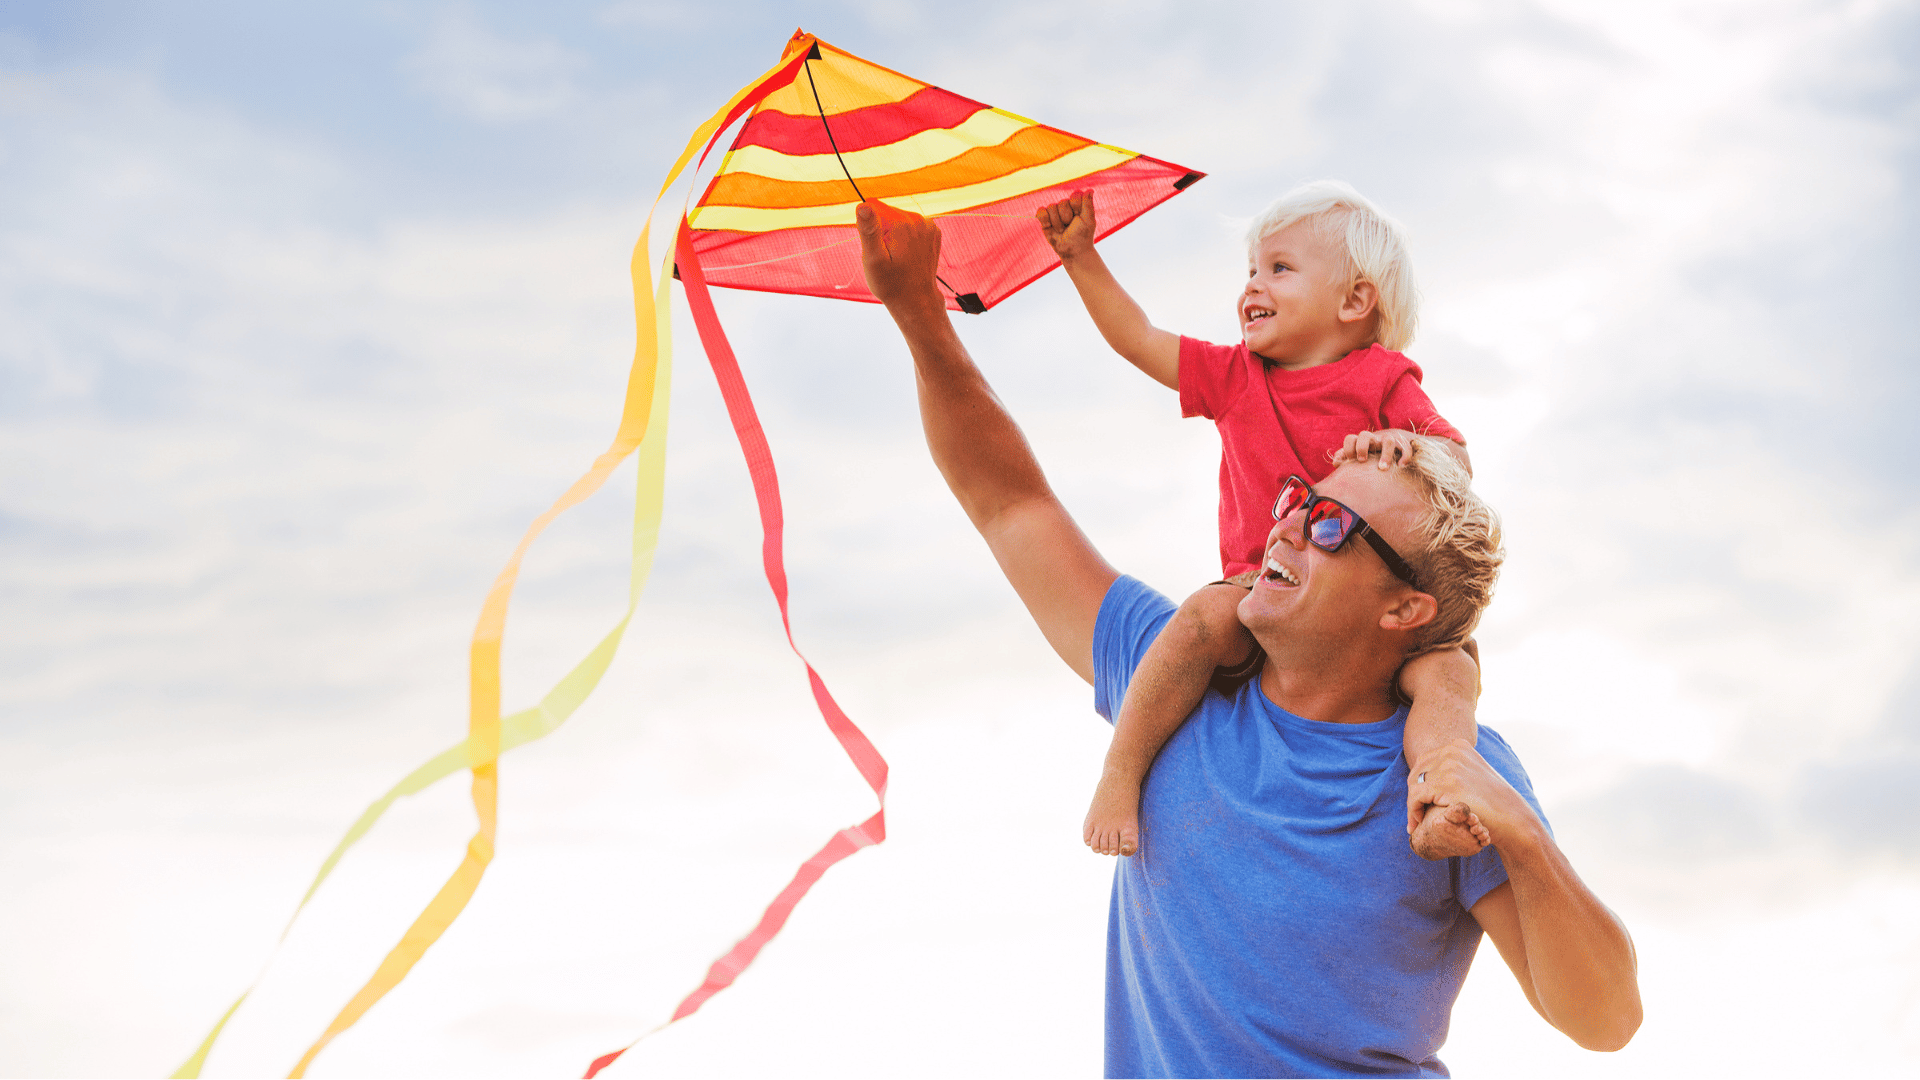 Man with child on his shoulders flying a kite